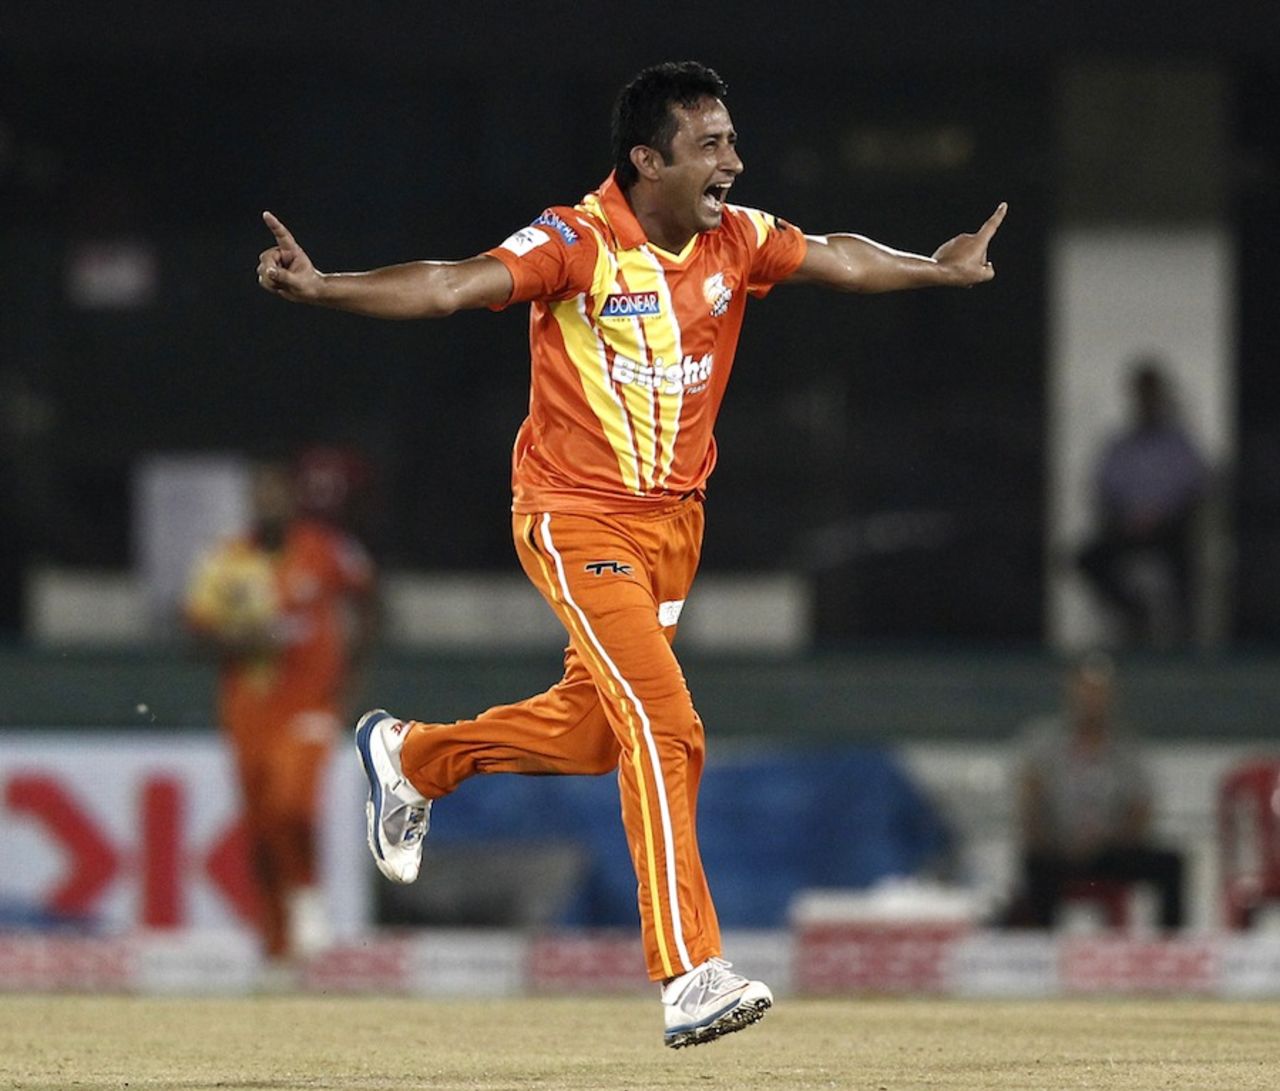 Imran Ali is thrilled with a wicket, Mumbai Indians v Lahore Lions, CLT20 qualifier, Raipur, September 13, 2014